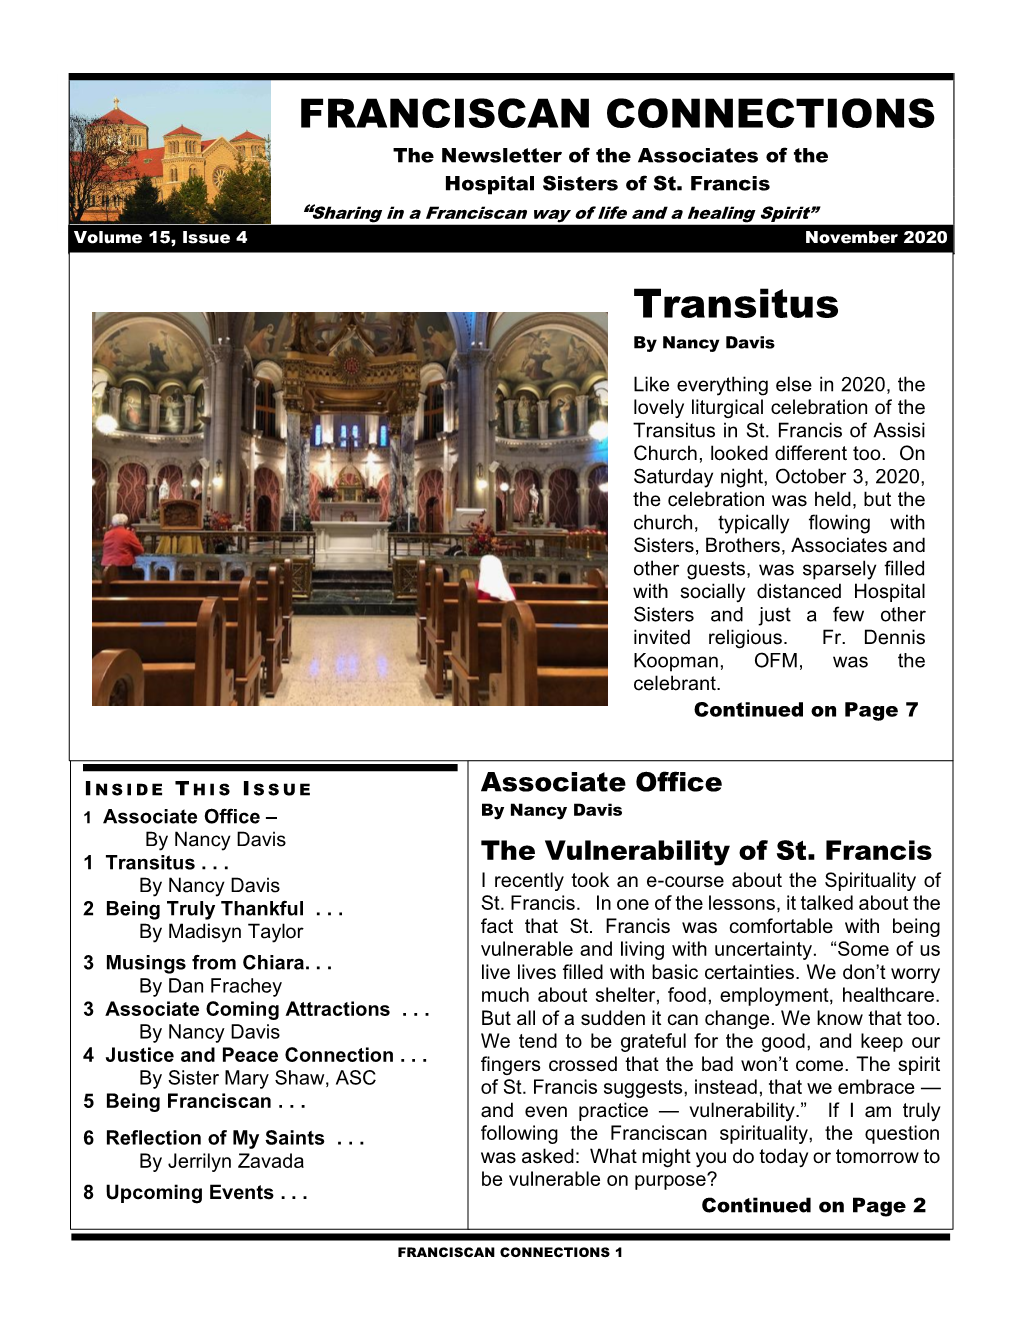 FRANCISCAN CONNECTIONS the Newsletter of the Associates of the Hospital Sisters of St